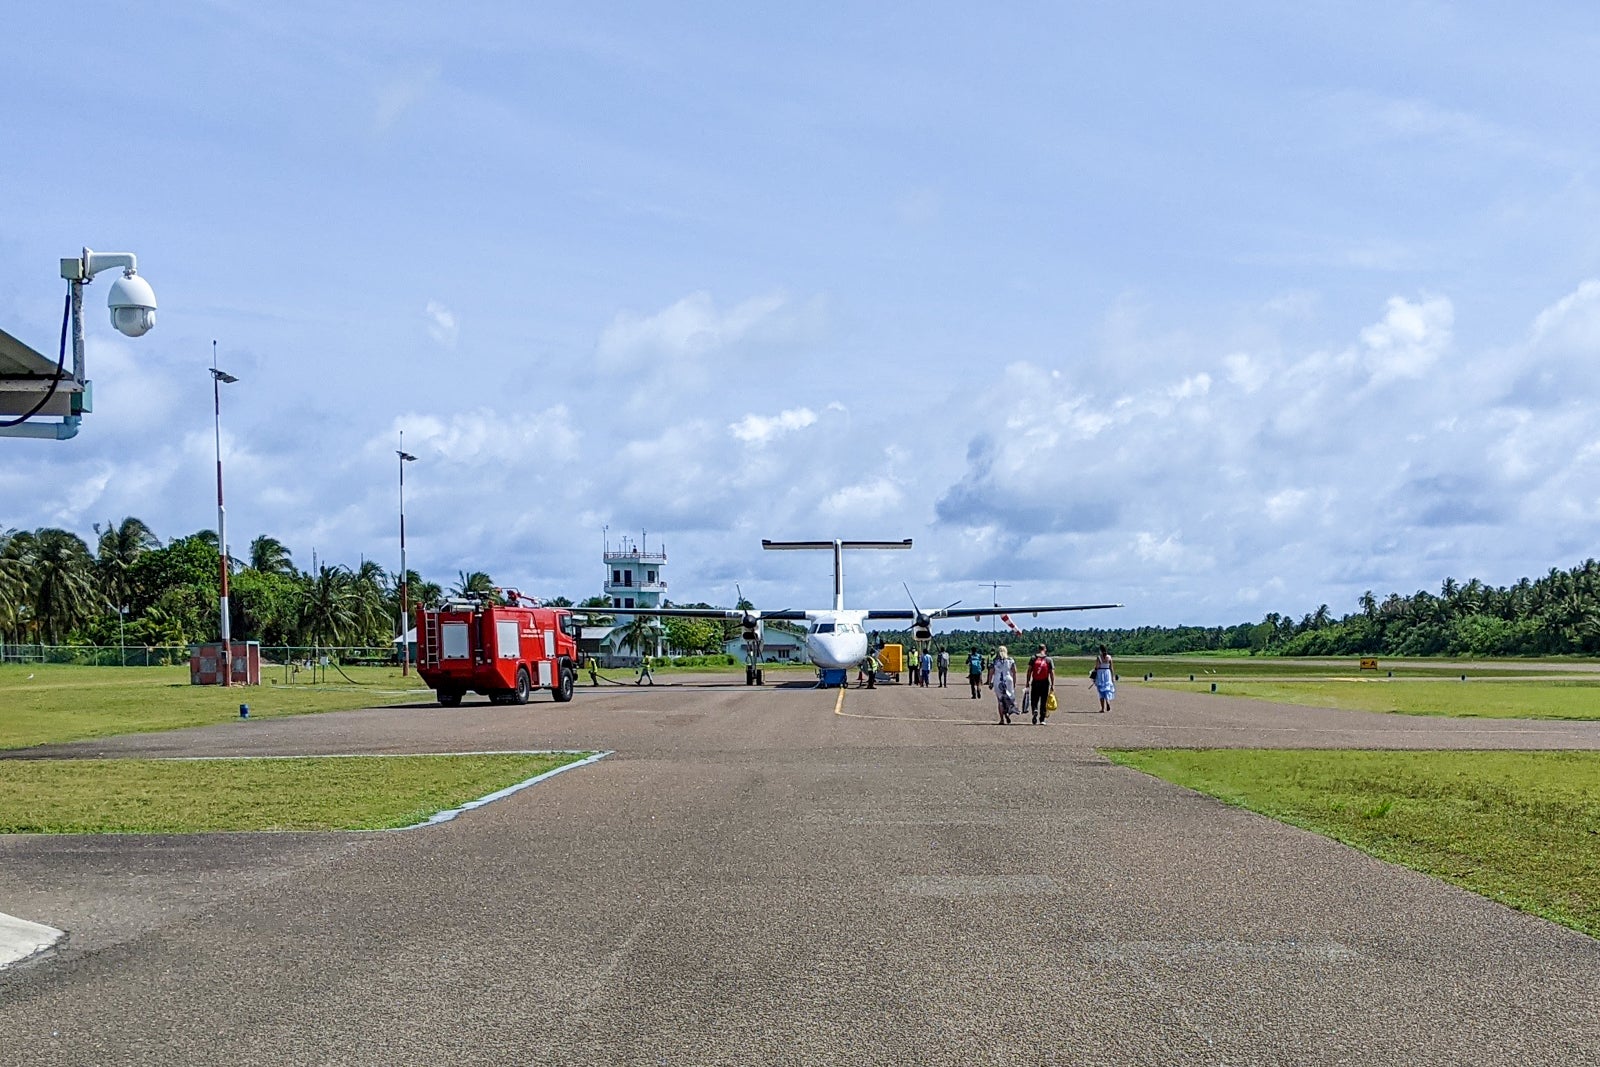 Walking to our plane at Kadhdhoo airport